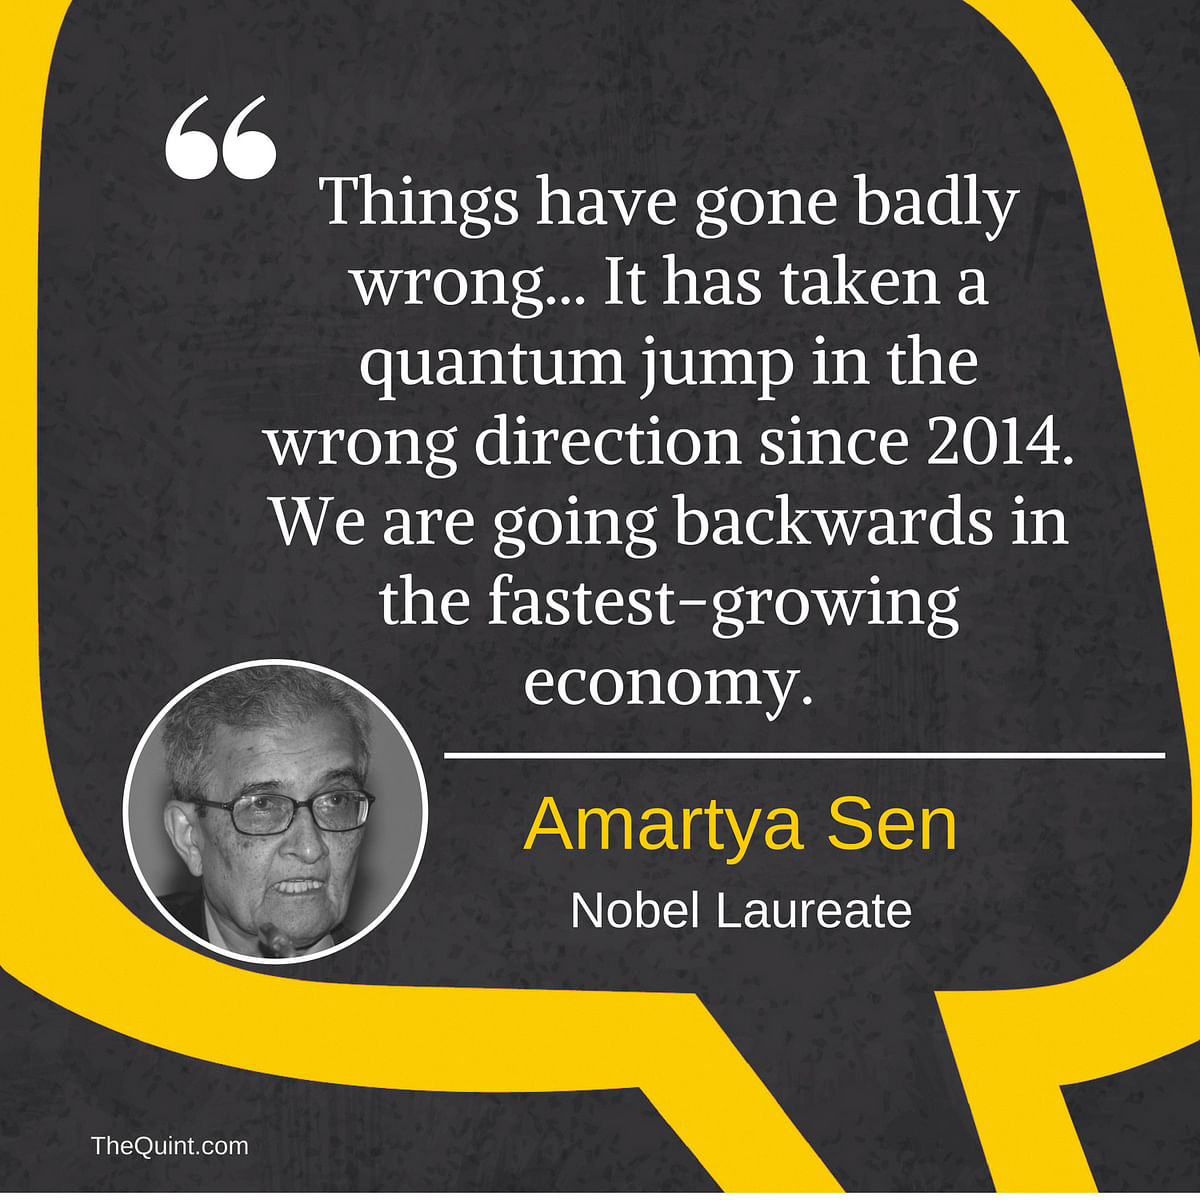  “Things have gone pretty badly wrong... We are getting backwards in the fastest-growing economy,” Amartya Sen said.